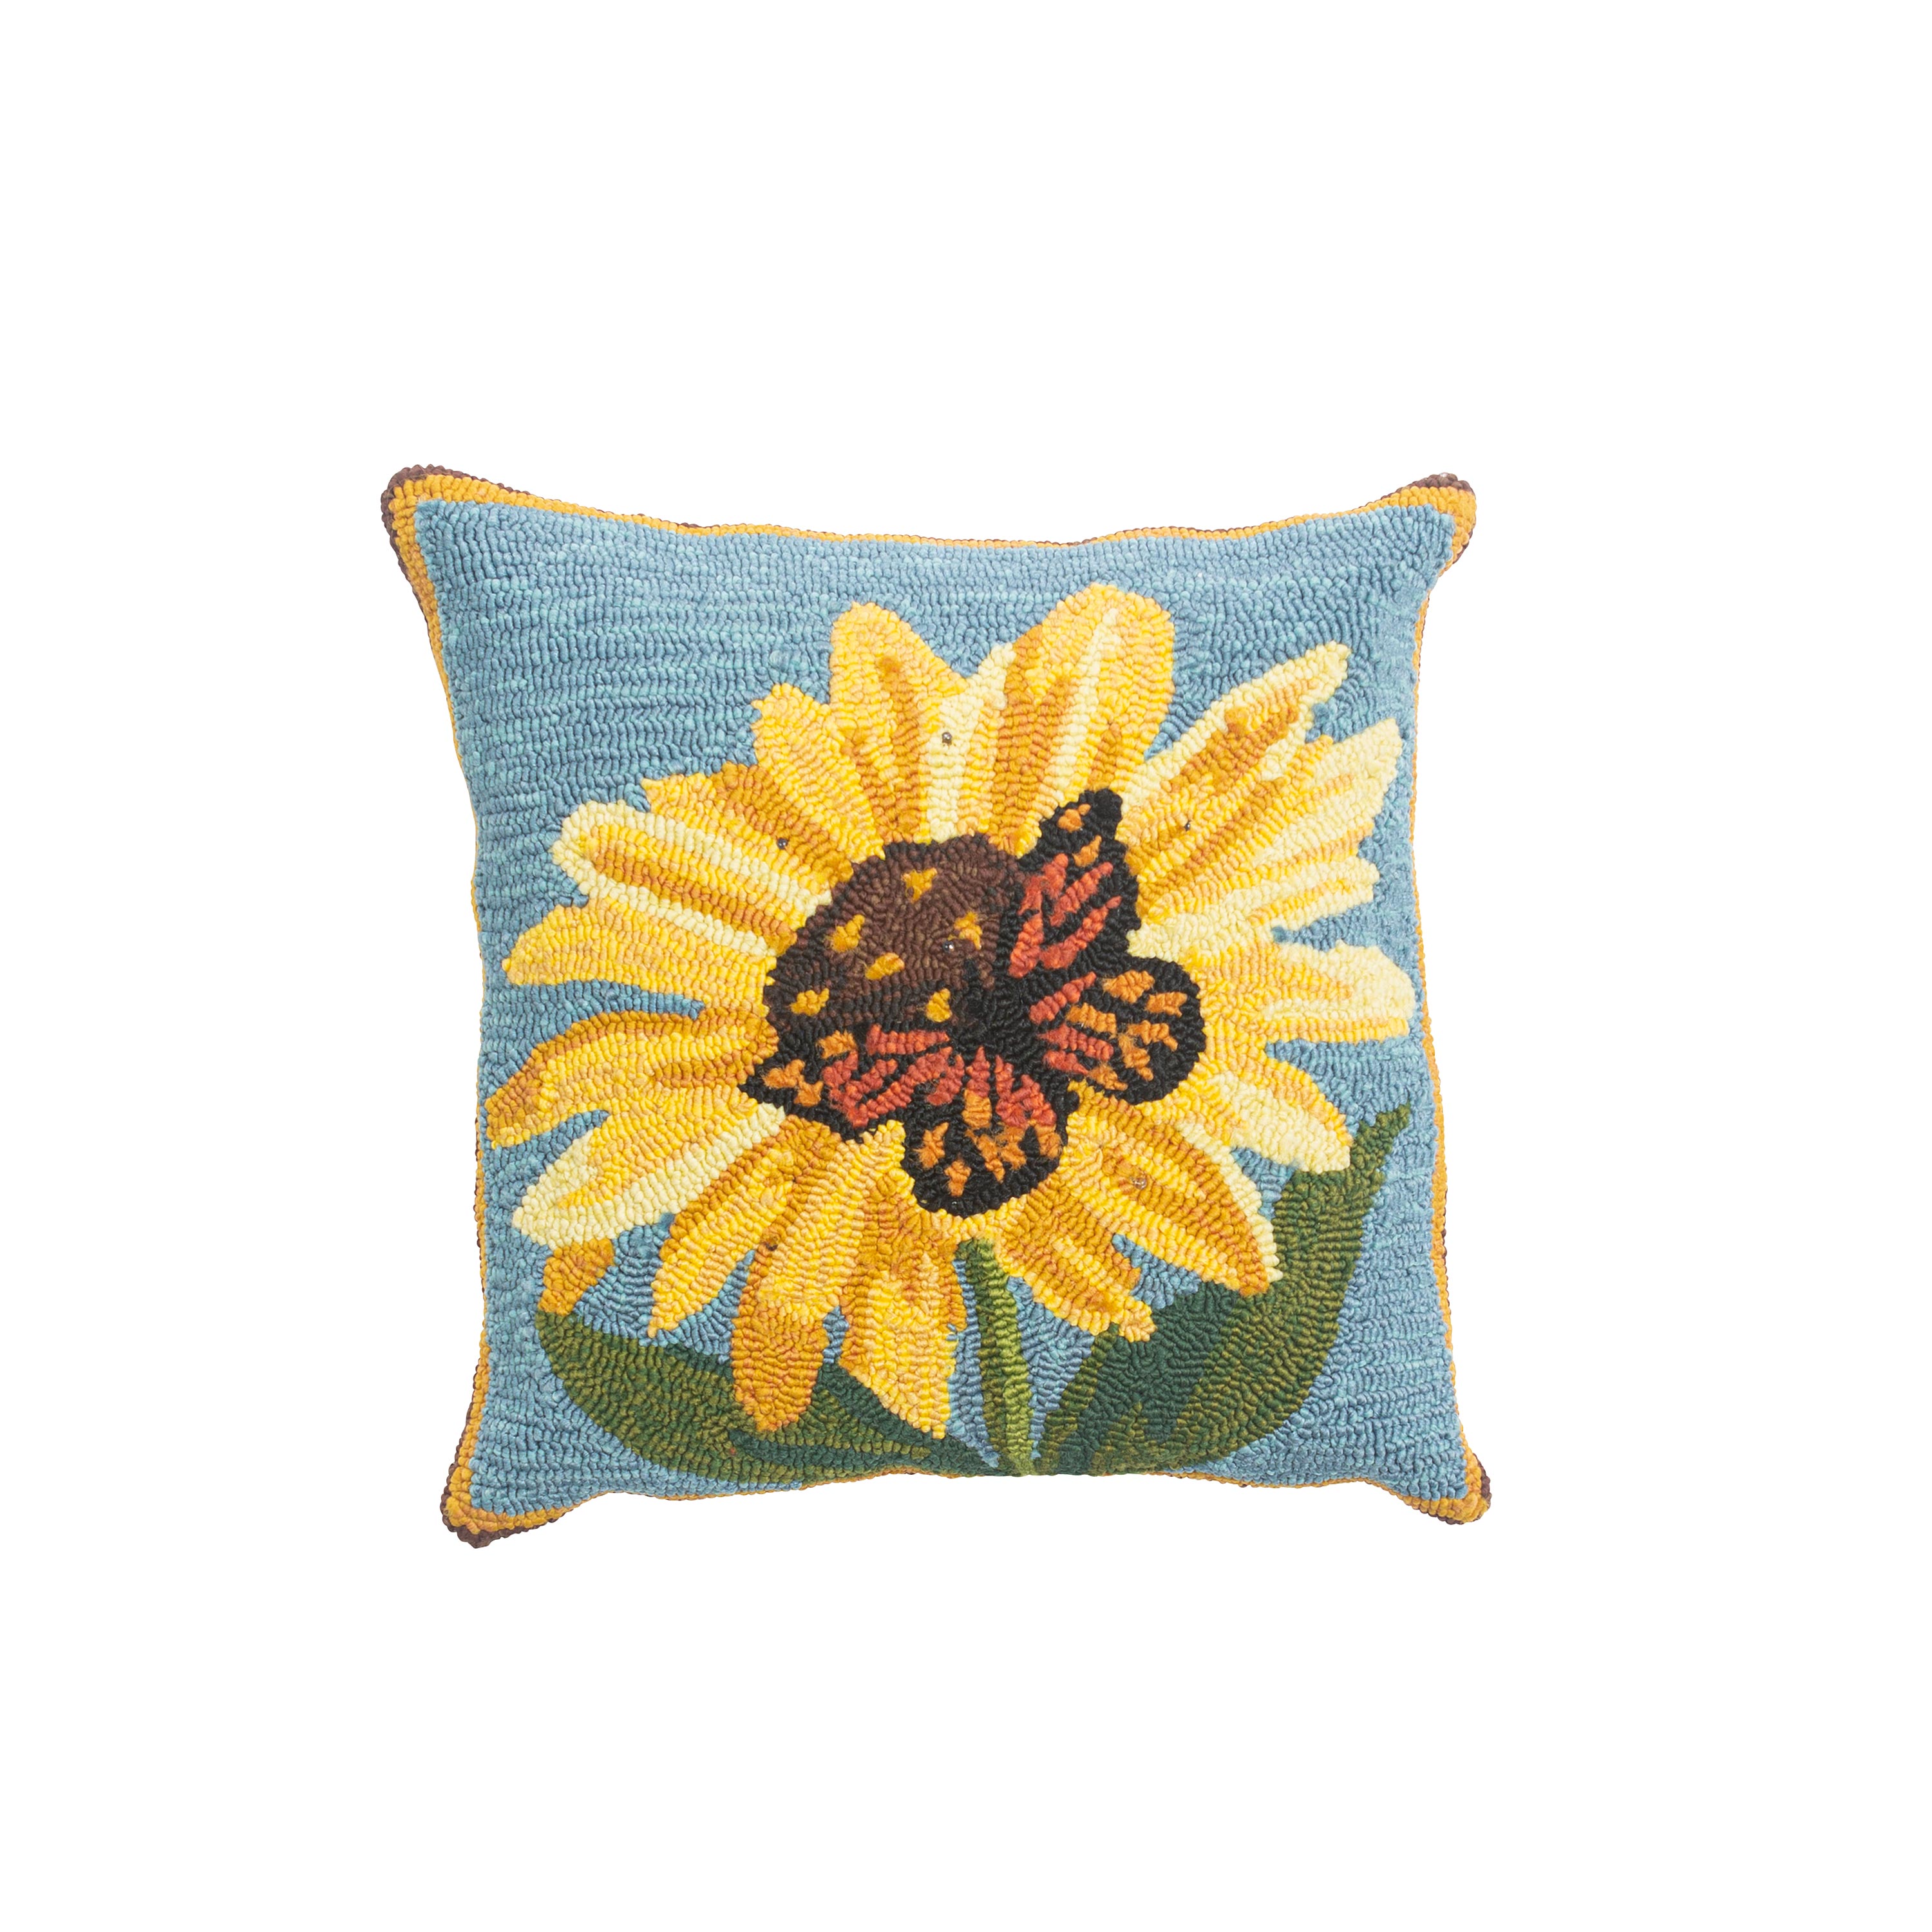 Indoor/Outdoor Hooked Polypropylene Sunflower and Butterfly Throw Pillow